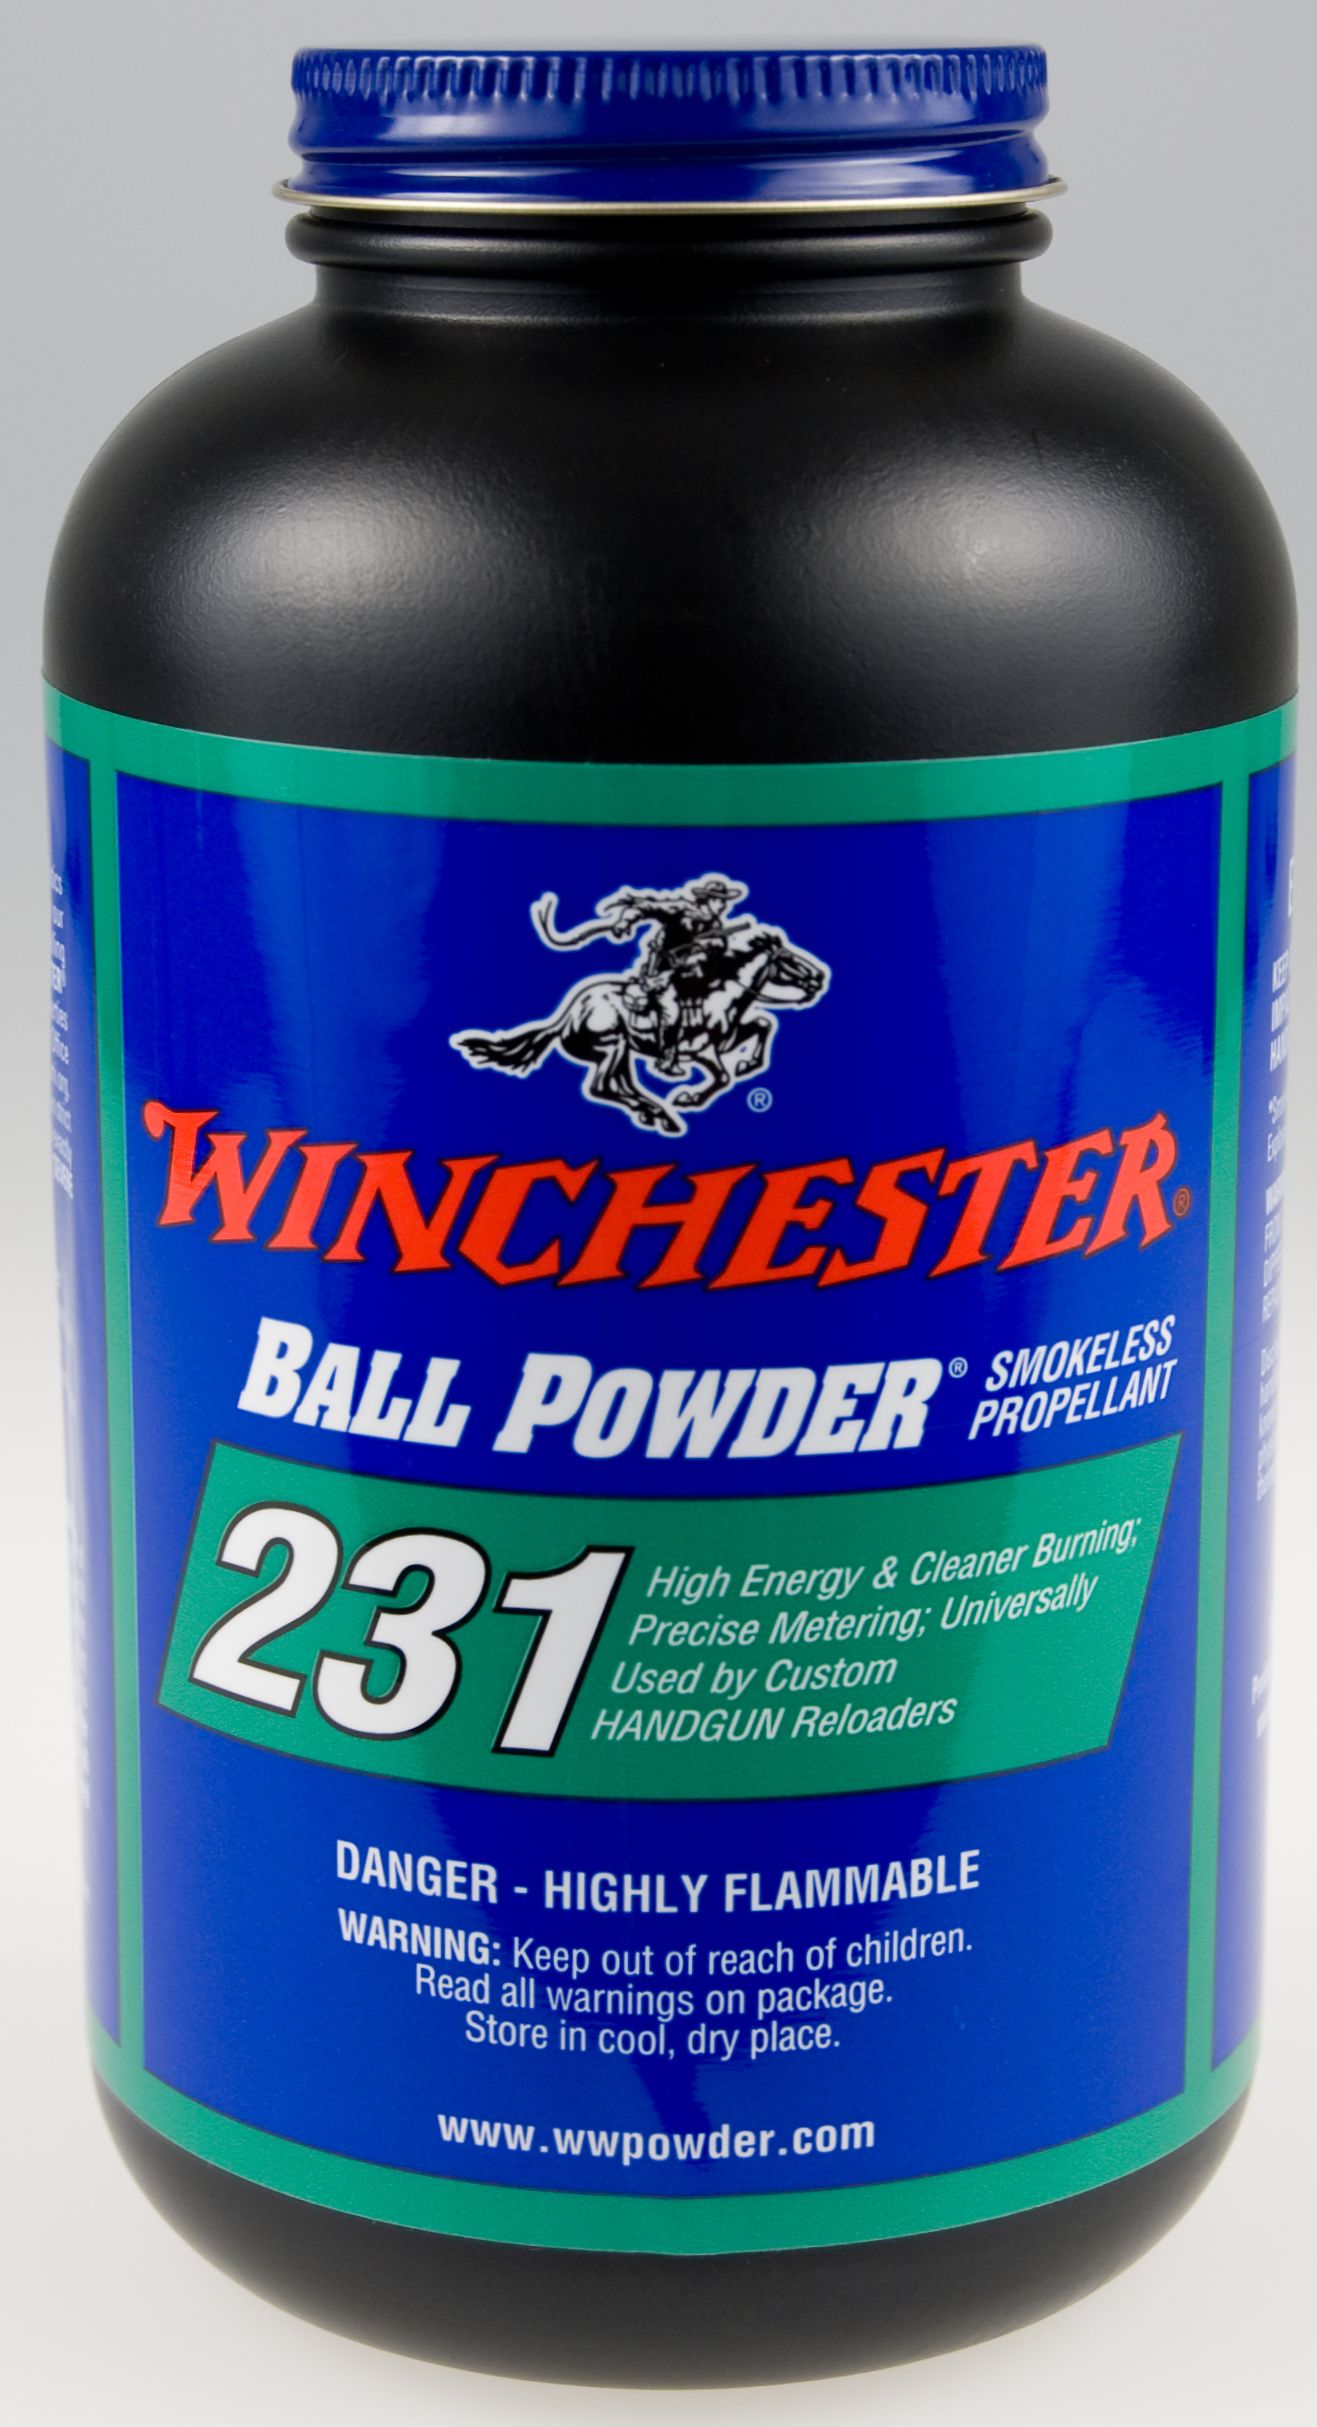 lawry-shooting-sports-clay-target-manufactures-winchester-231